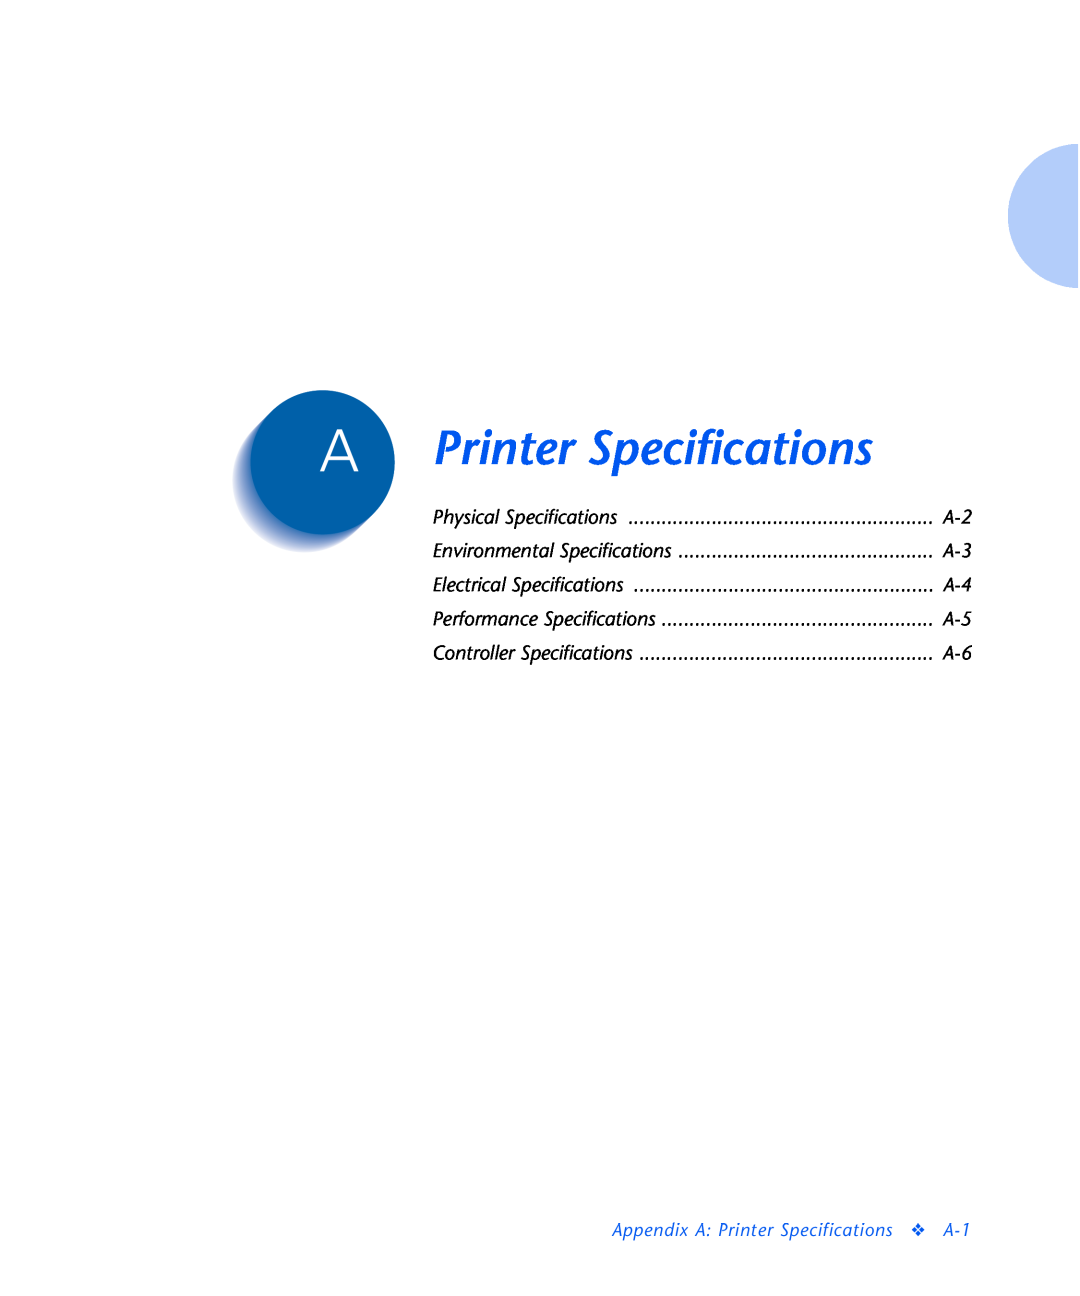 Xerox N2125 manual Appendix A Printer Specifications A-1 